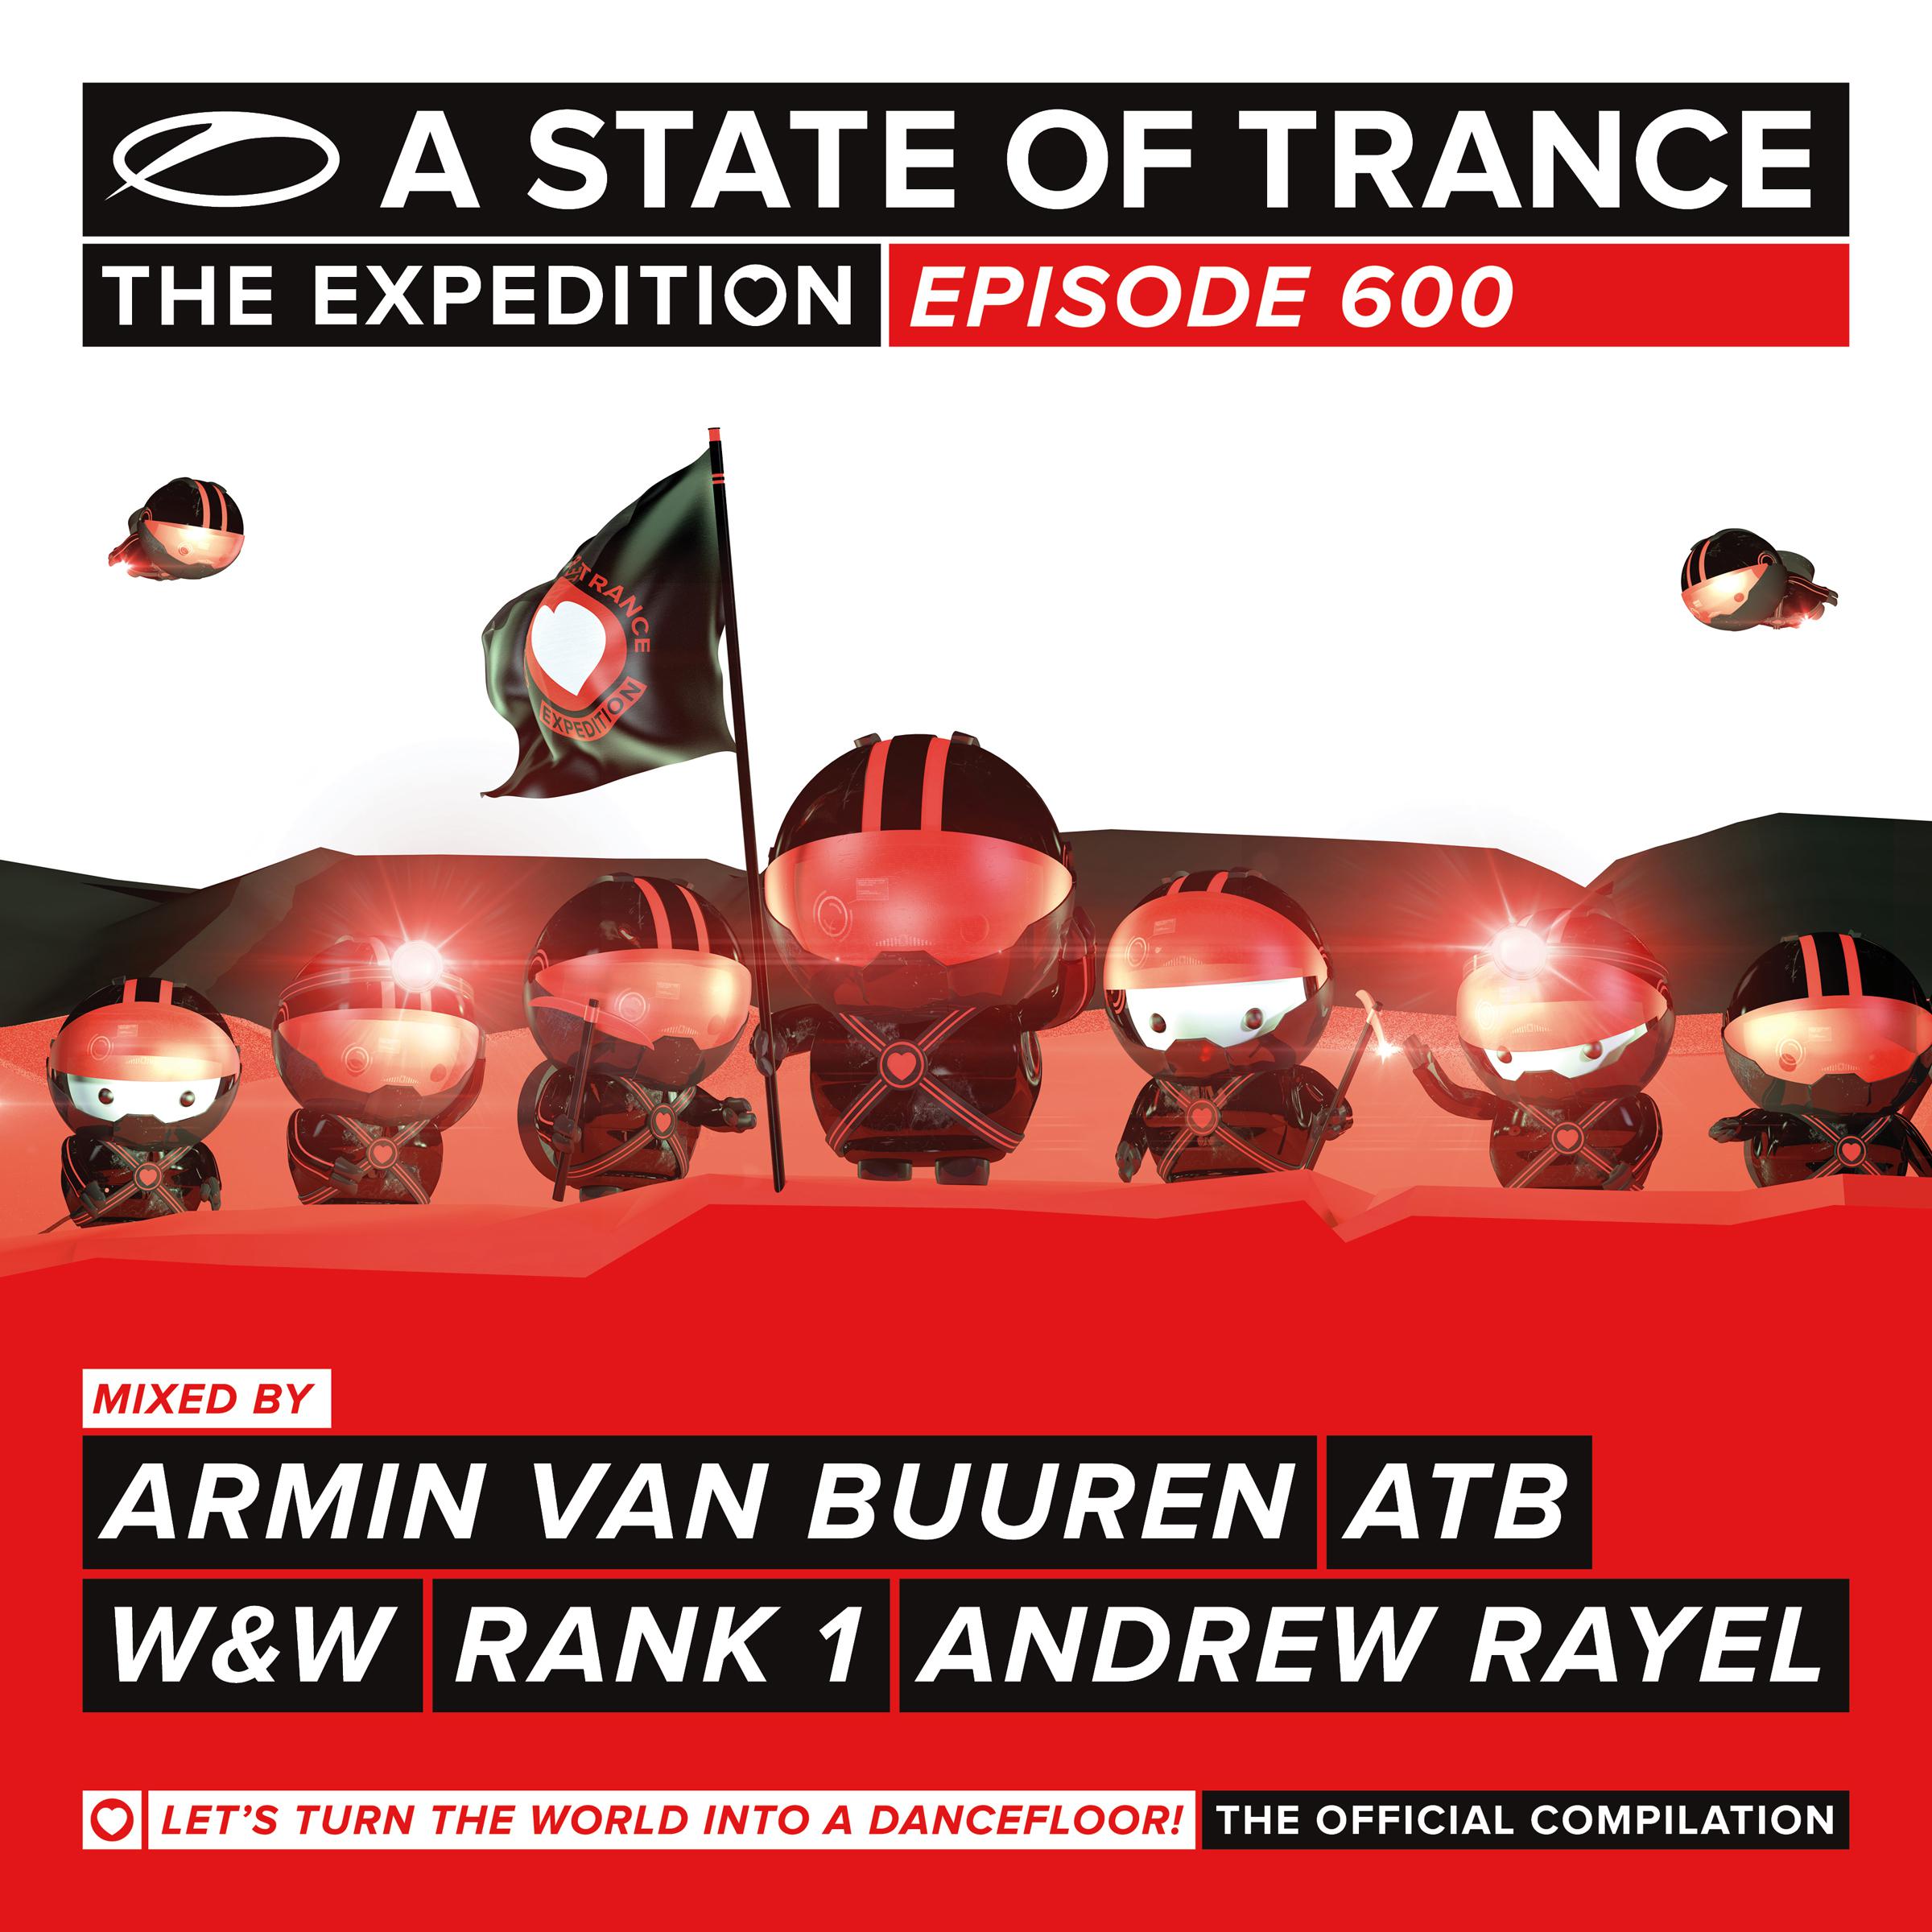 A State Of Trance 600 (Selected by Armin van Buuren, ATB, W&W, Rank 1 & Andrew Rayel)